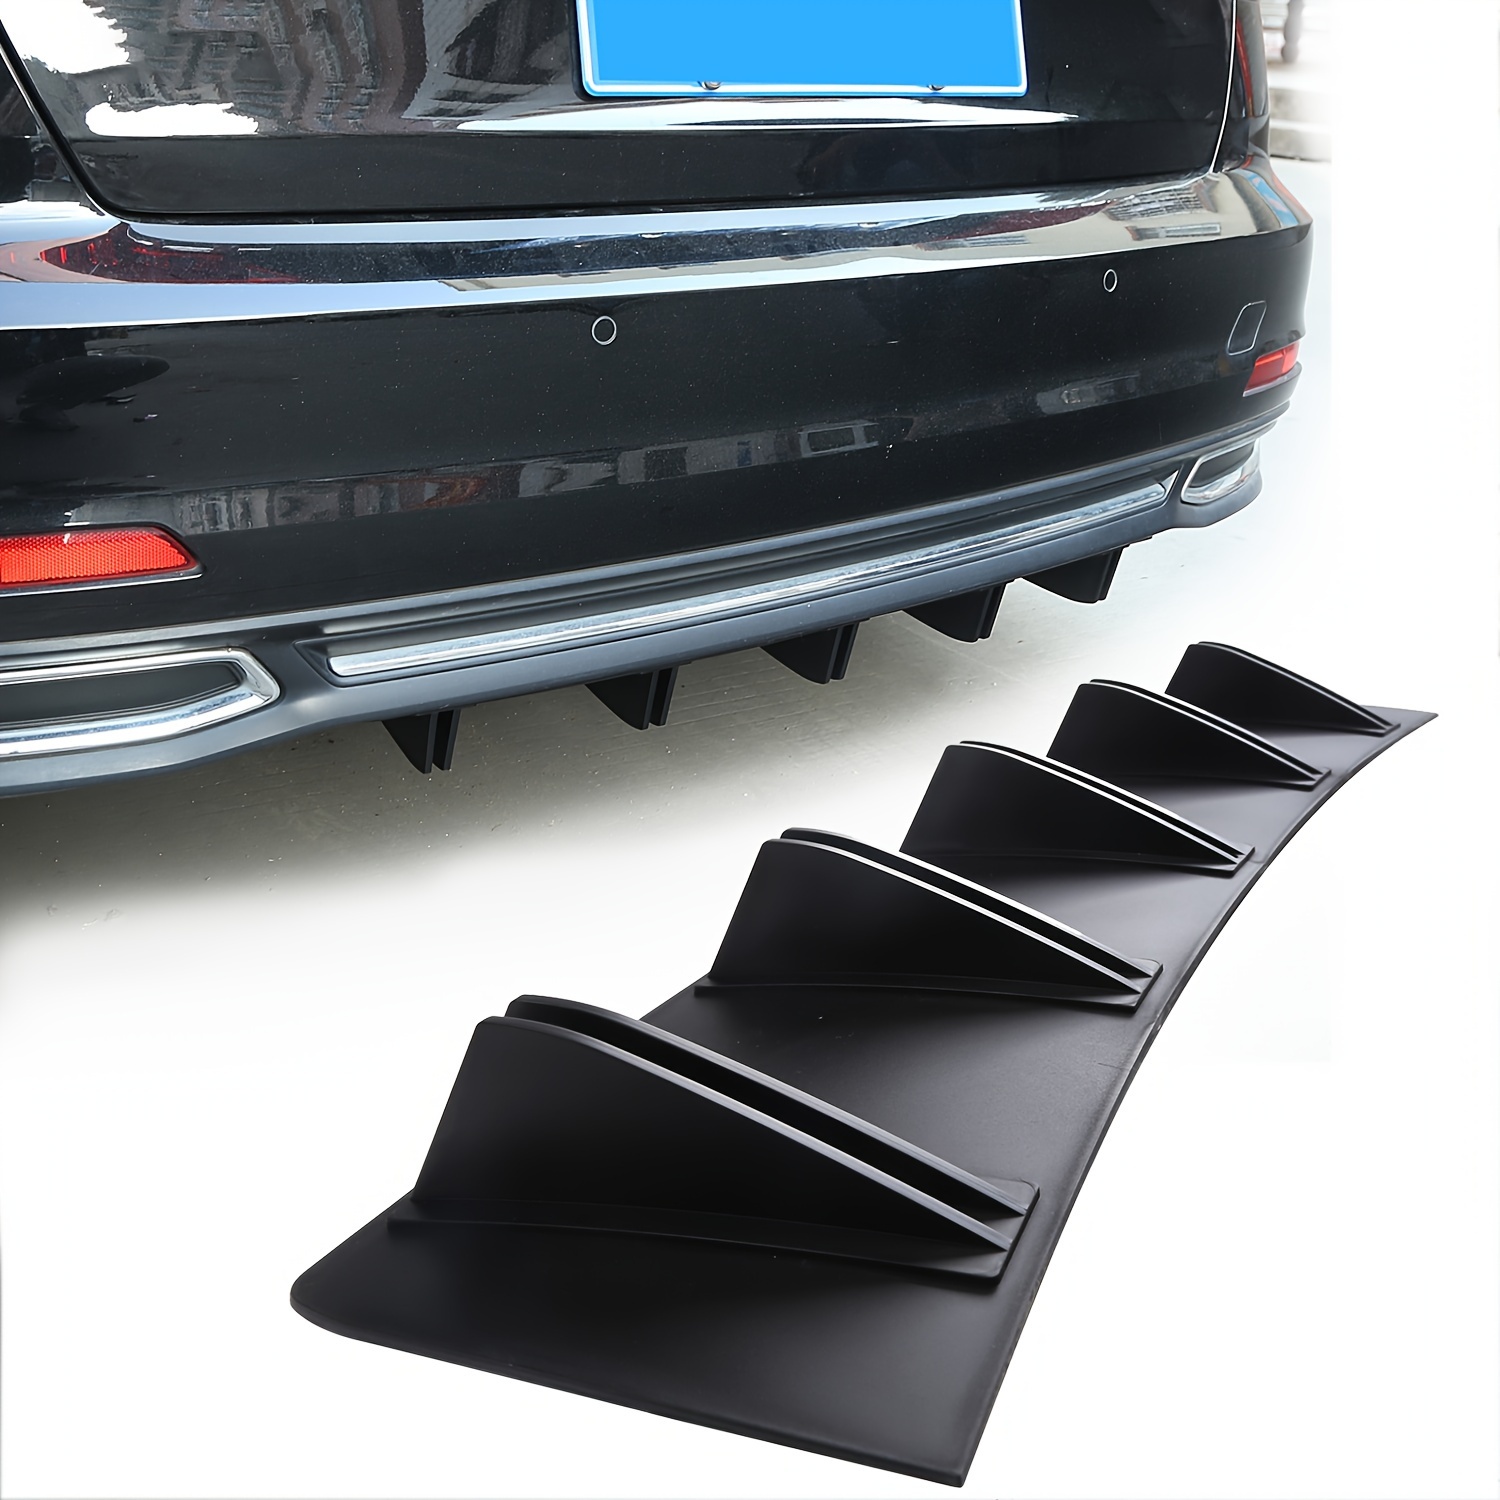  Front Bumper Lip Chin Spoiler Splitter Diffuser Guard Wing  Protector Trim Car Body Kit, Universal Fit for Most Cars, Gloss Black,4pcs  : Automotive